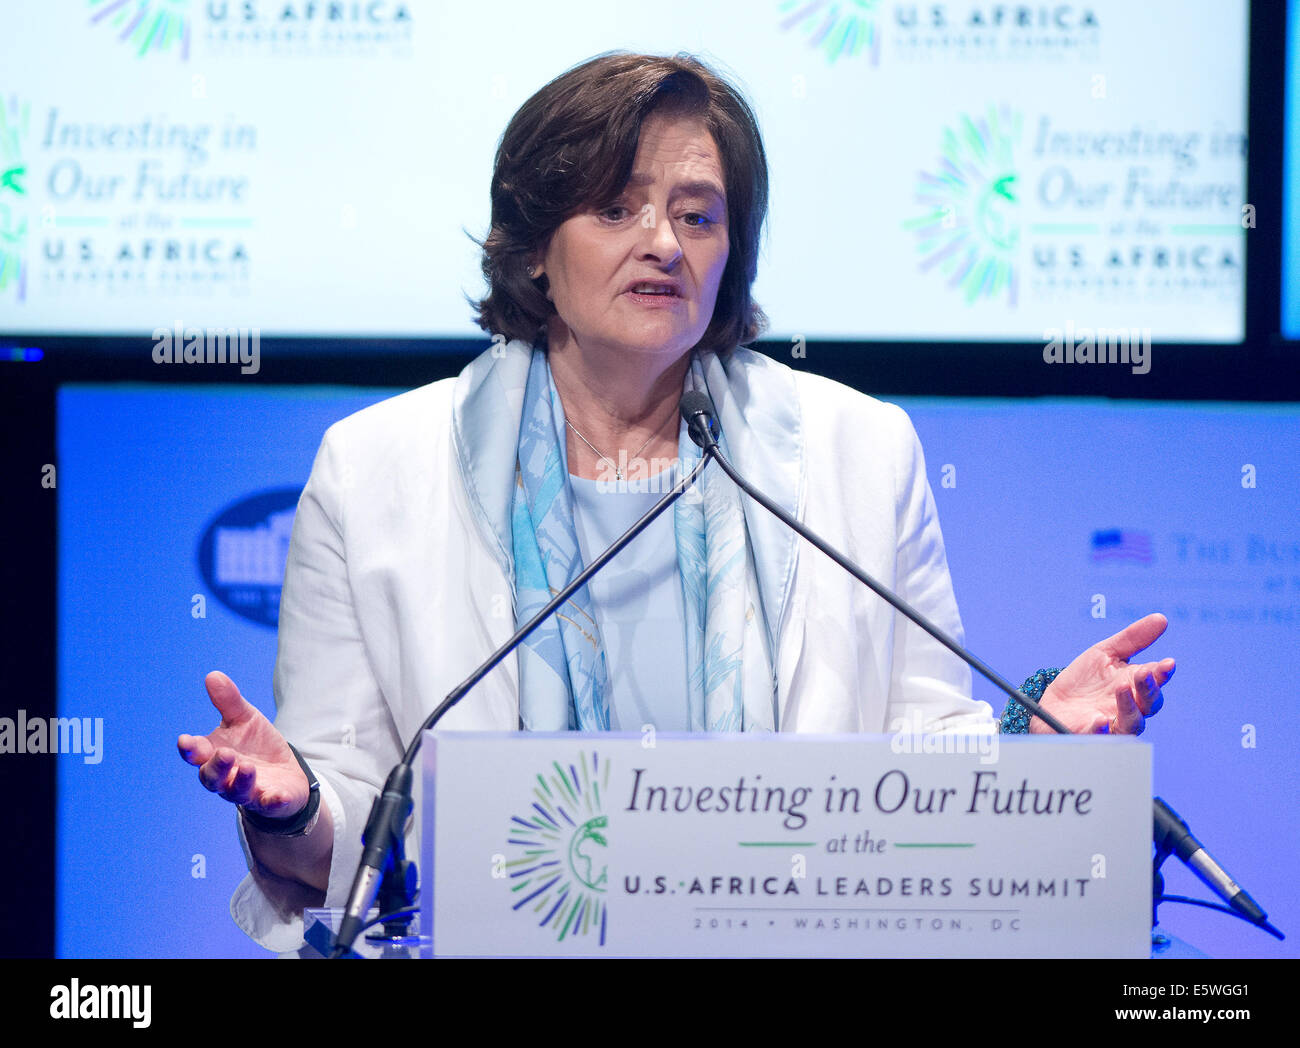 Washington DC, US. 6th Aug, 2014. Cherie Blair, wife of former British Prime Minister Tony Blair and founder, Cherie Blair Foundation for Women, makes remarks at the 'Investing in our Future at the U.S. - Africa Leaders Summit at the John F. Kennedy Center for the Performing Arts in Washington, DC on Wednesday, August 6, 2014. Credit:  dpa picture alliance/Alamy Live News Stock Photo